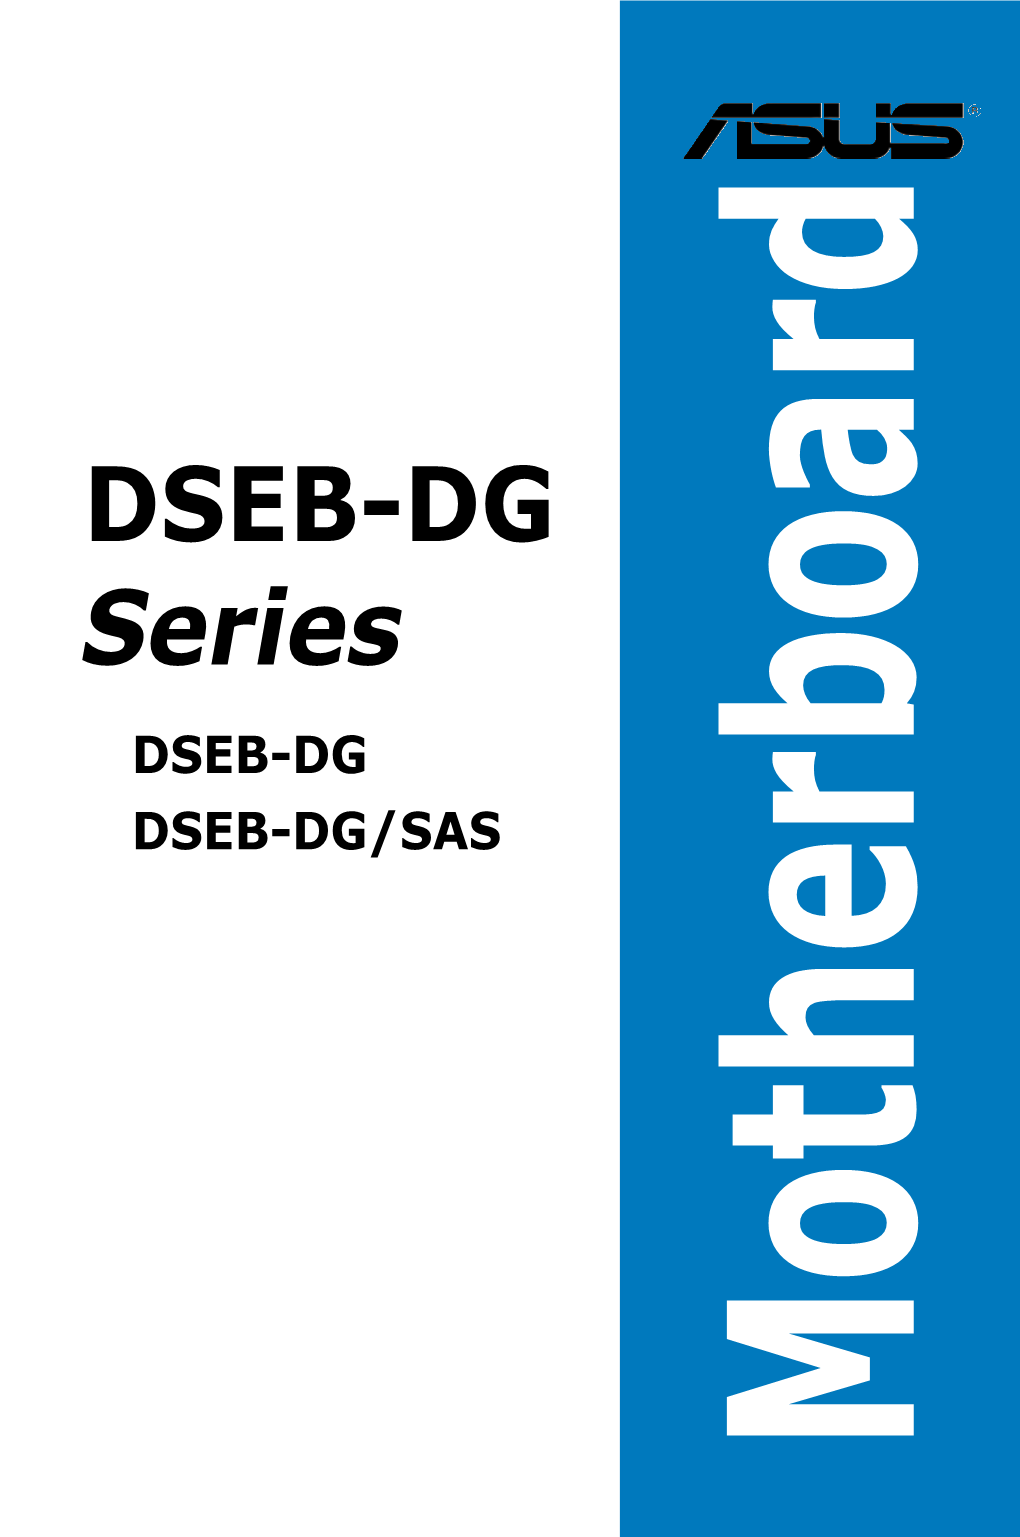 DSEB-DG Series Specifications Summary